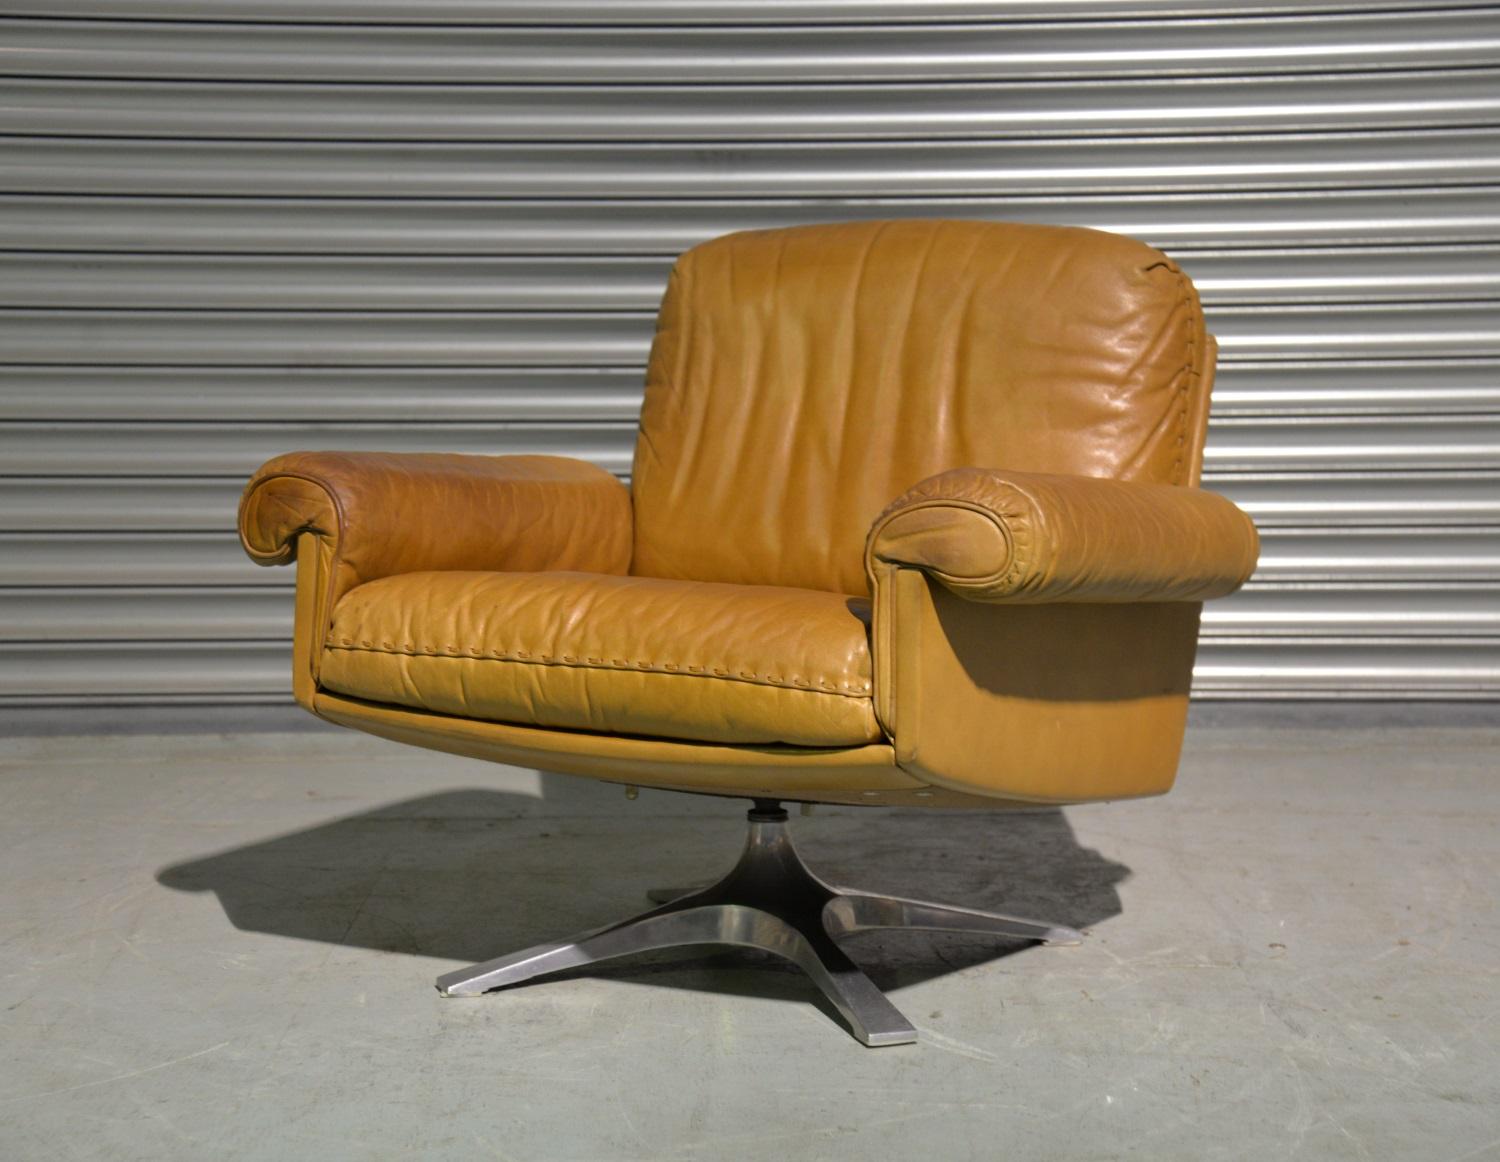 Discounted airfreight for our US Continent and International customers ( from 2 weeks door to door) 

We are delighted to bring to you a vintage 1970`s De Sede DS 31 swivel lounge armchair in soft cognac aniline leather with superb whipstitch edge